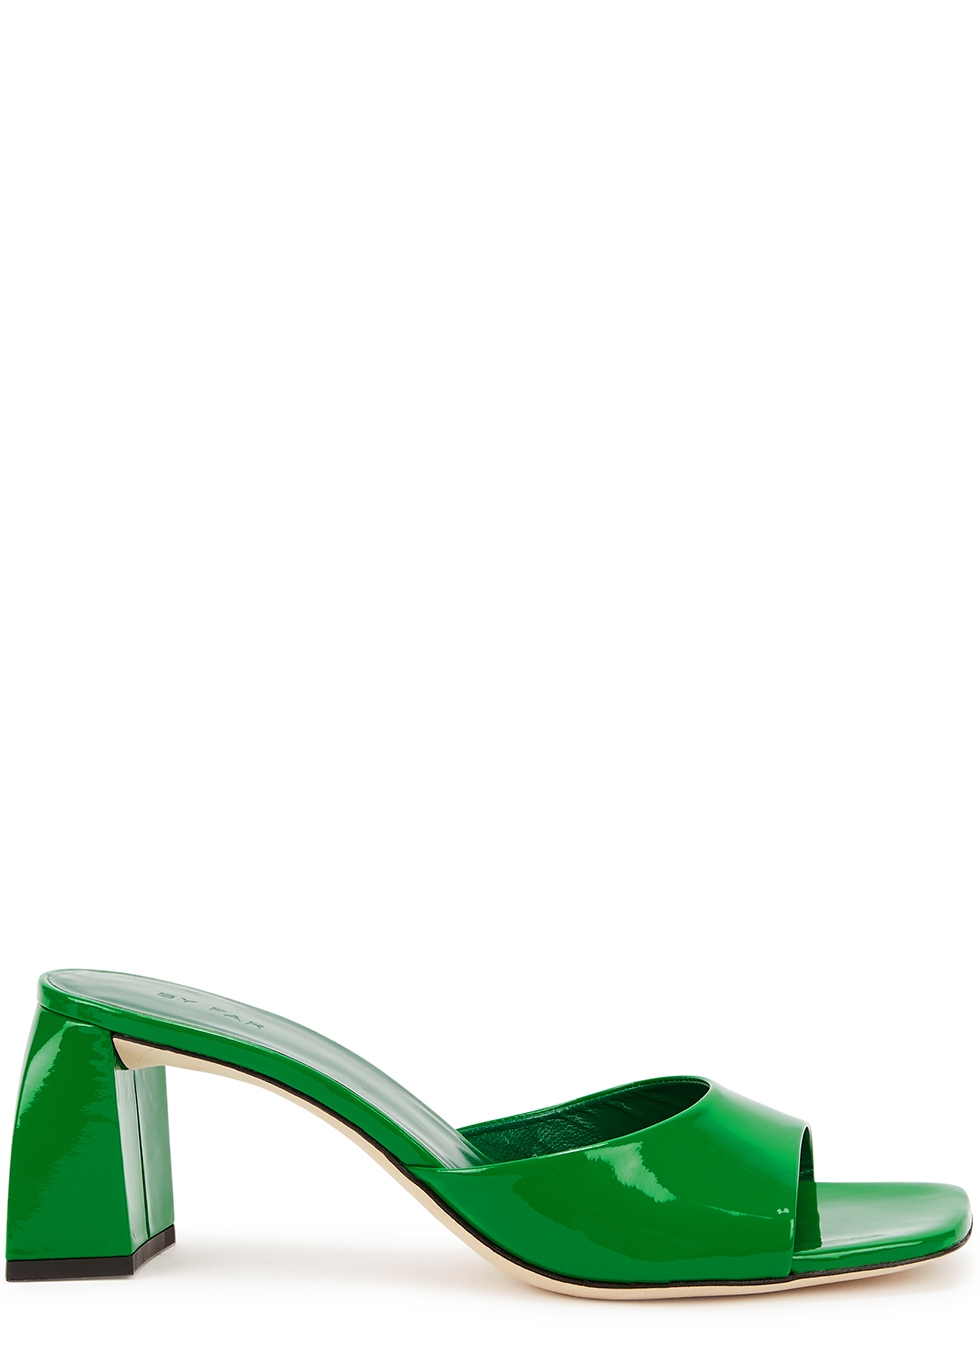 Romy 75 green patent leather mules